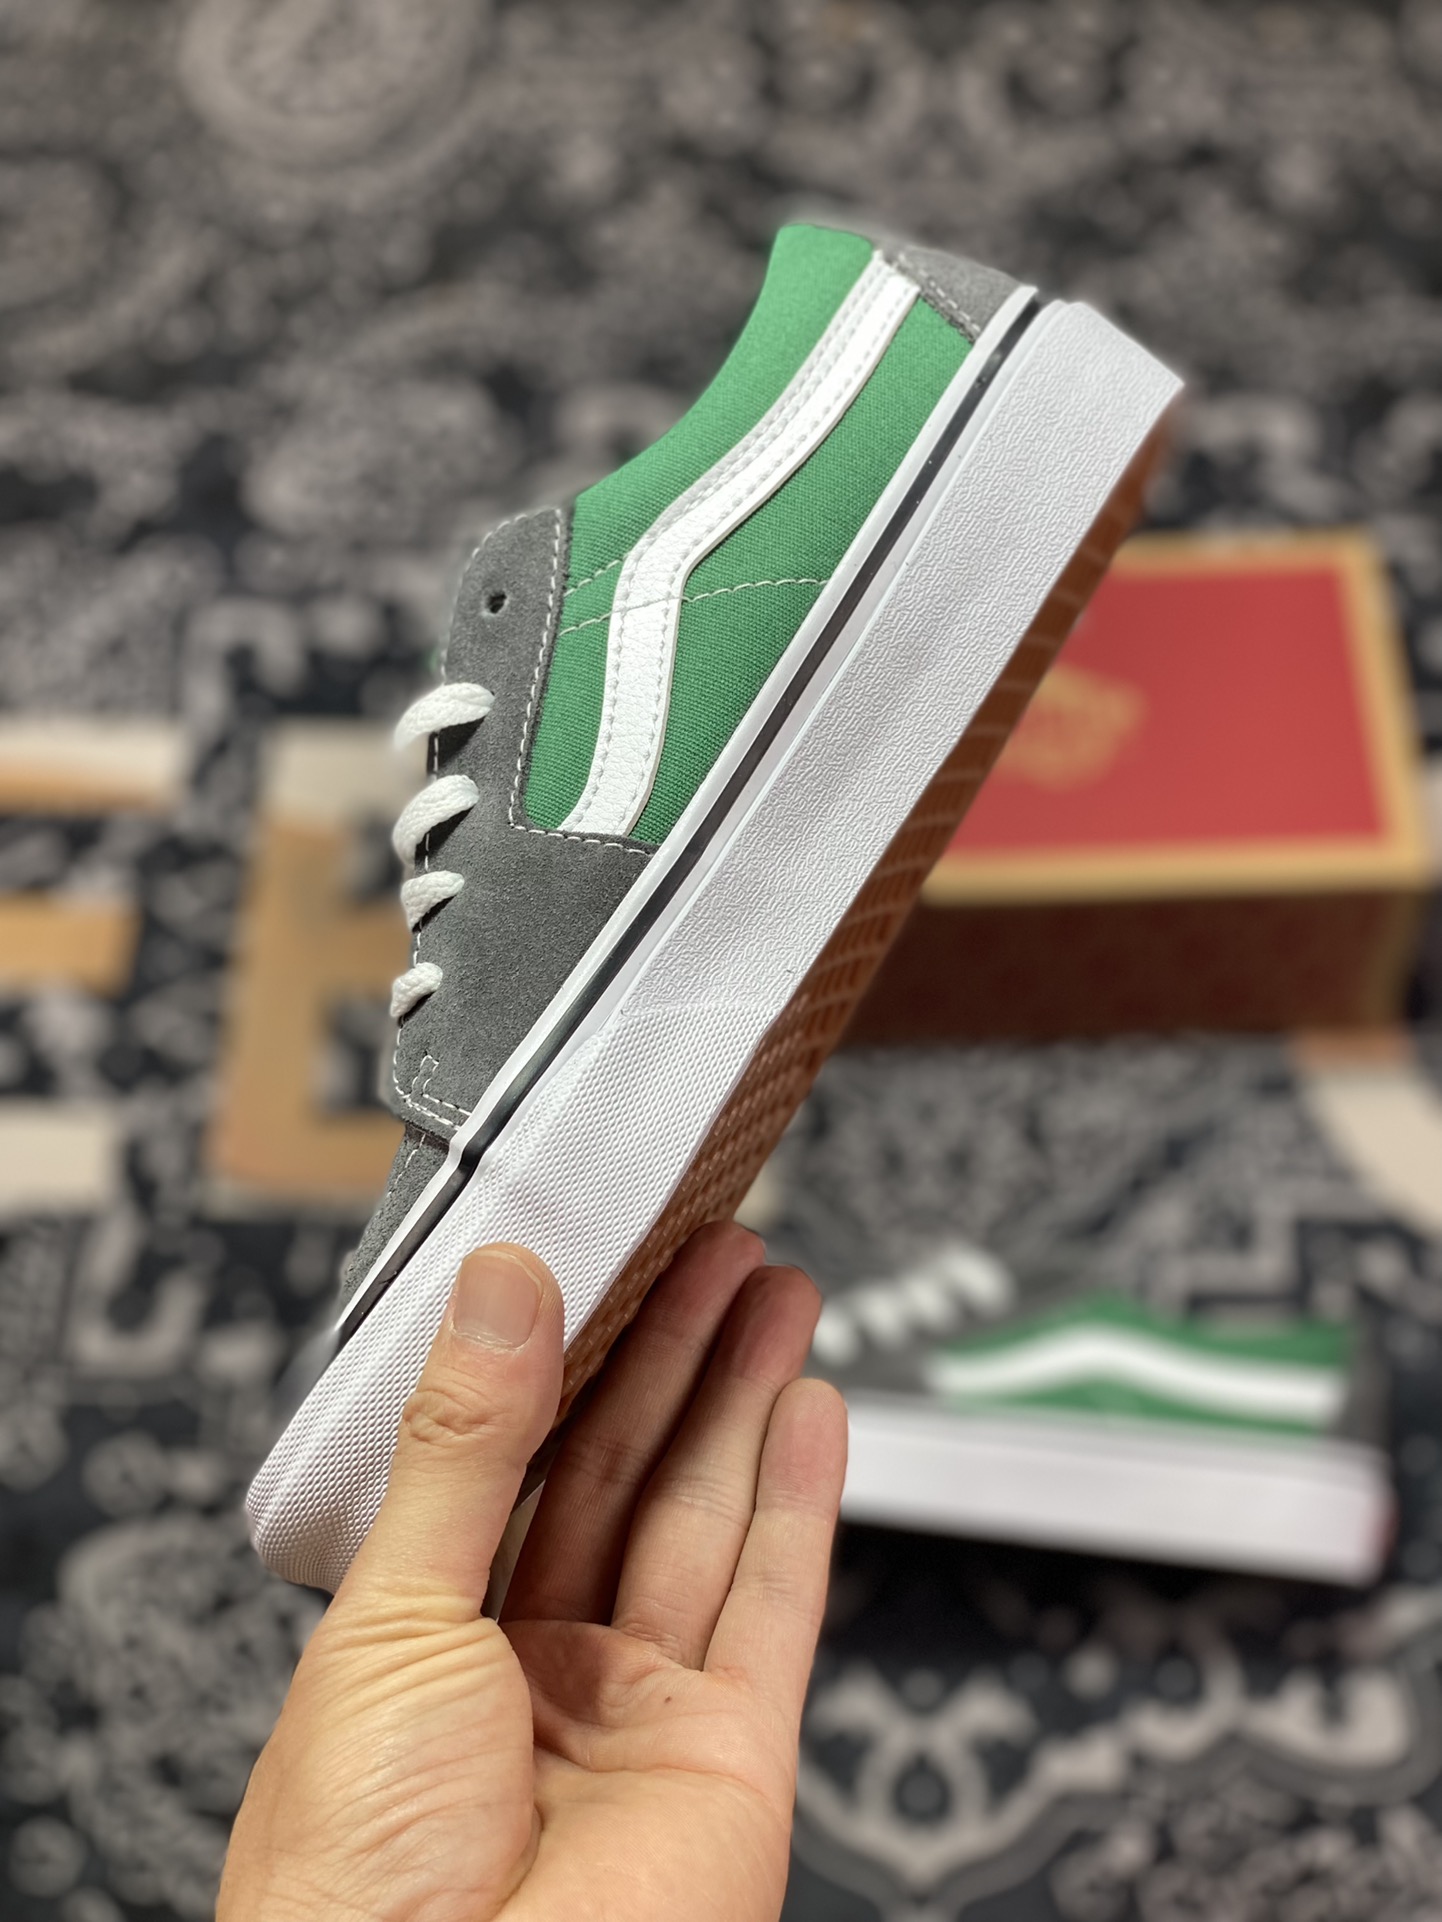 Defining a simple and versatile style, I highly recommend Vans SK8-Low in contrasting gray and green.